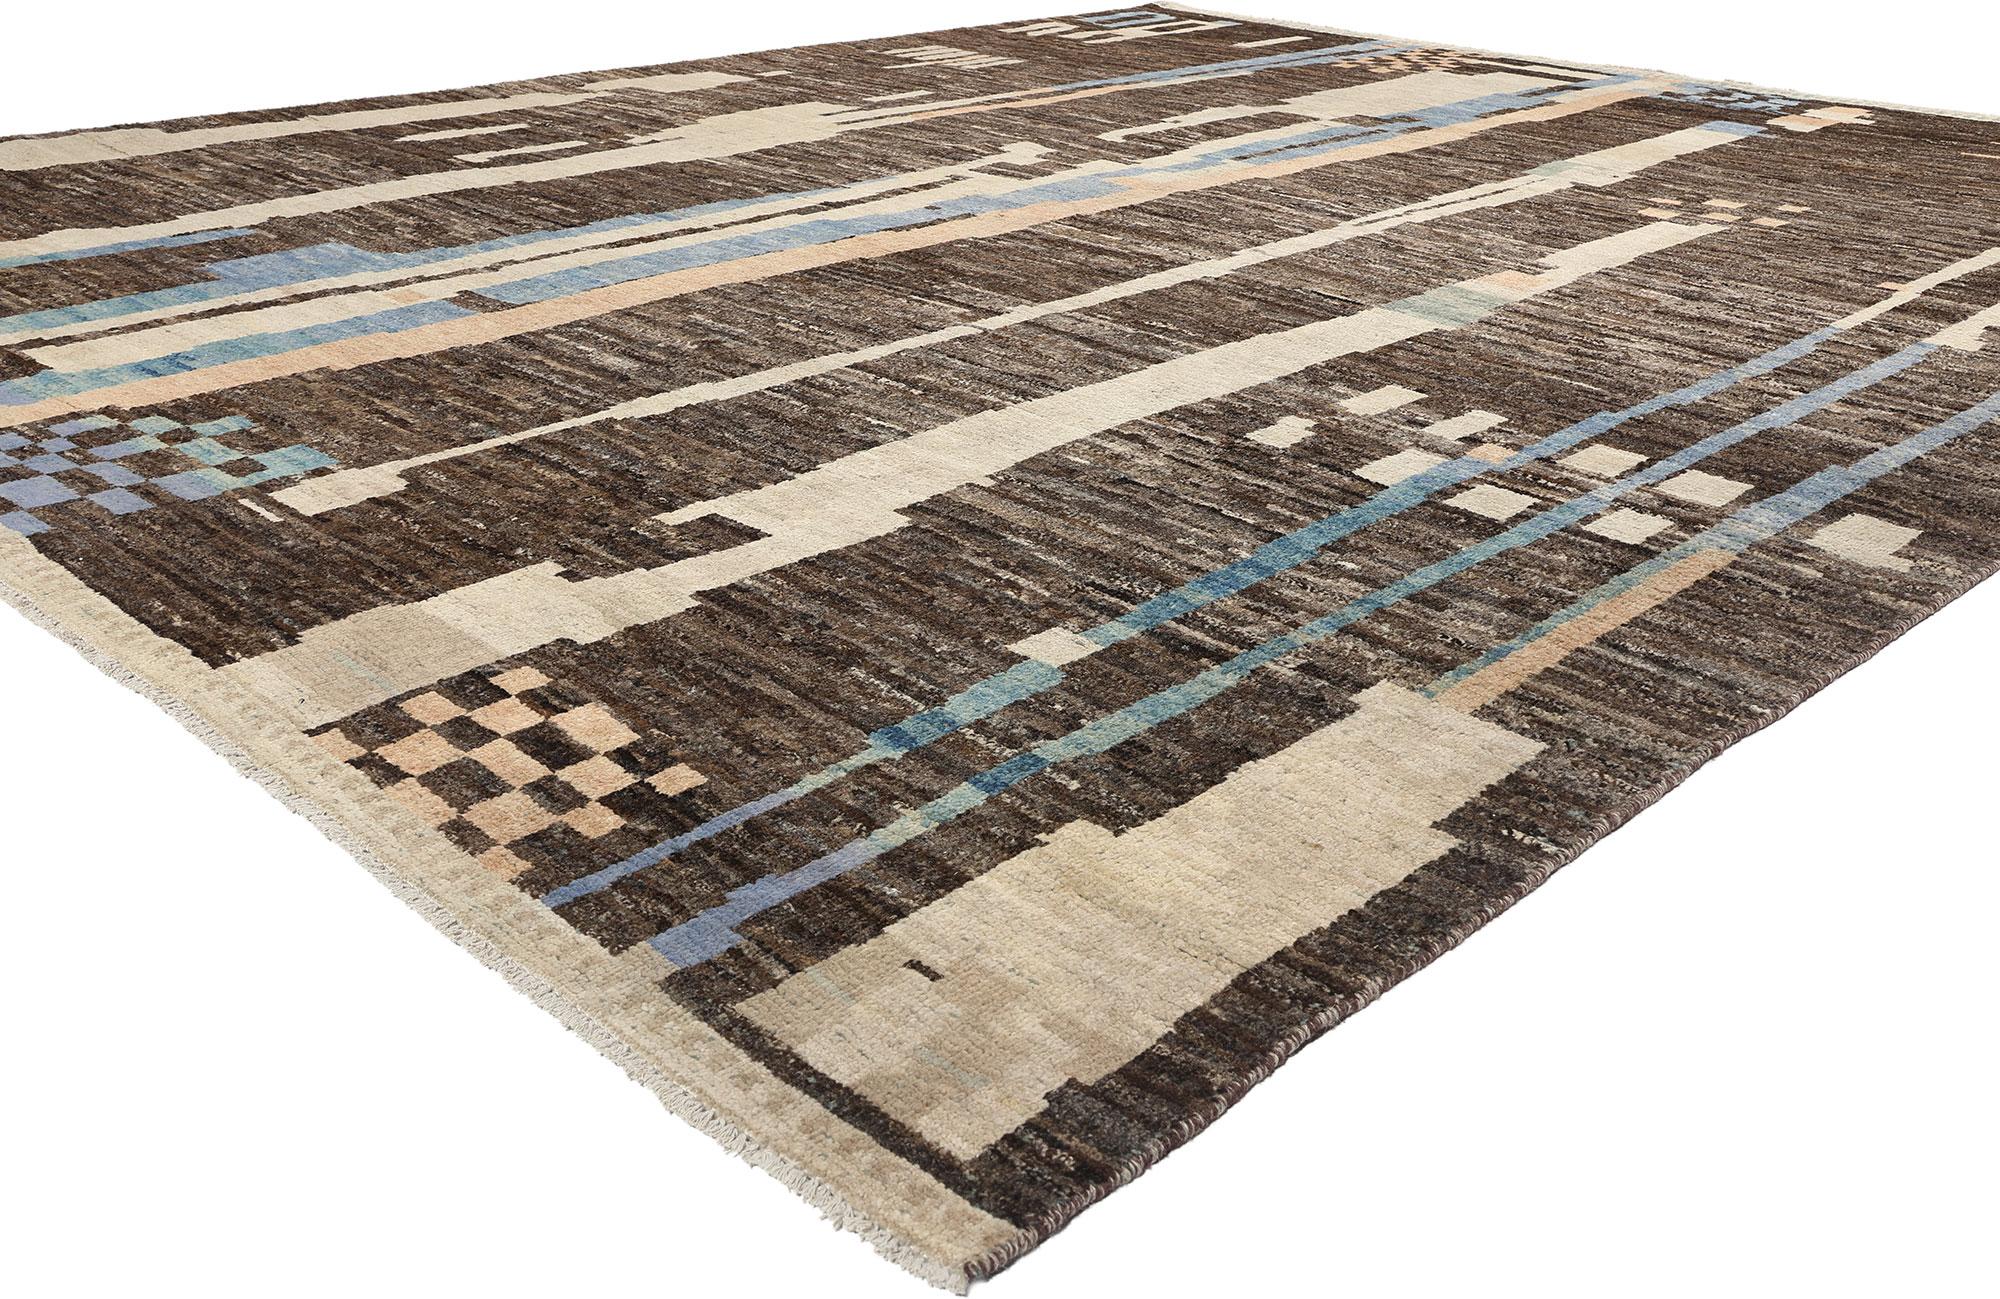 81065 Organic Modern Brutalist Moroccan Rug, 12'01 x 14'08. Crafted with meticulous attention to detail, this hand-knotted wool Organic Modern Moroccan area rug serves as a captivating exploration of form, texture, emotion, and our innate connection